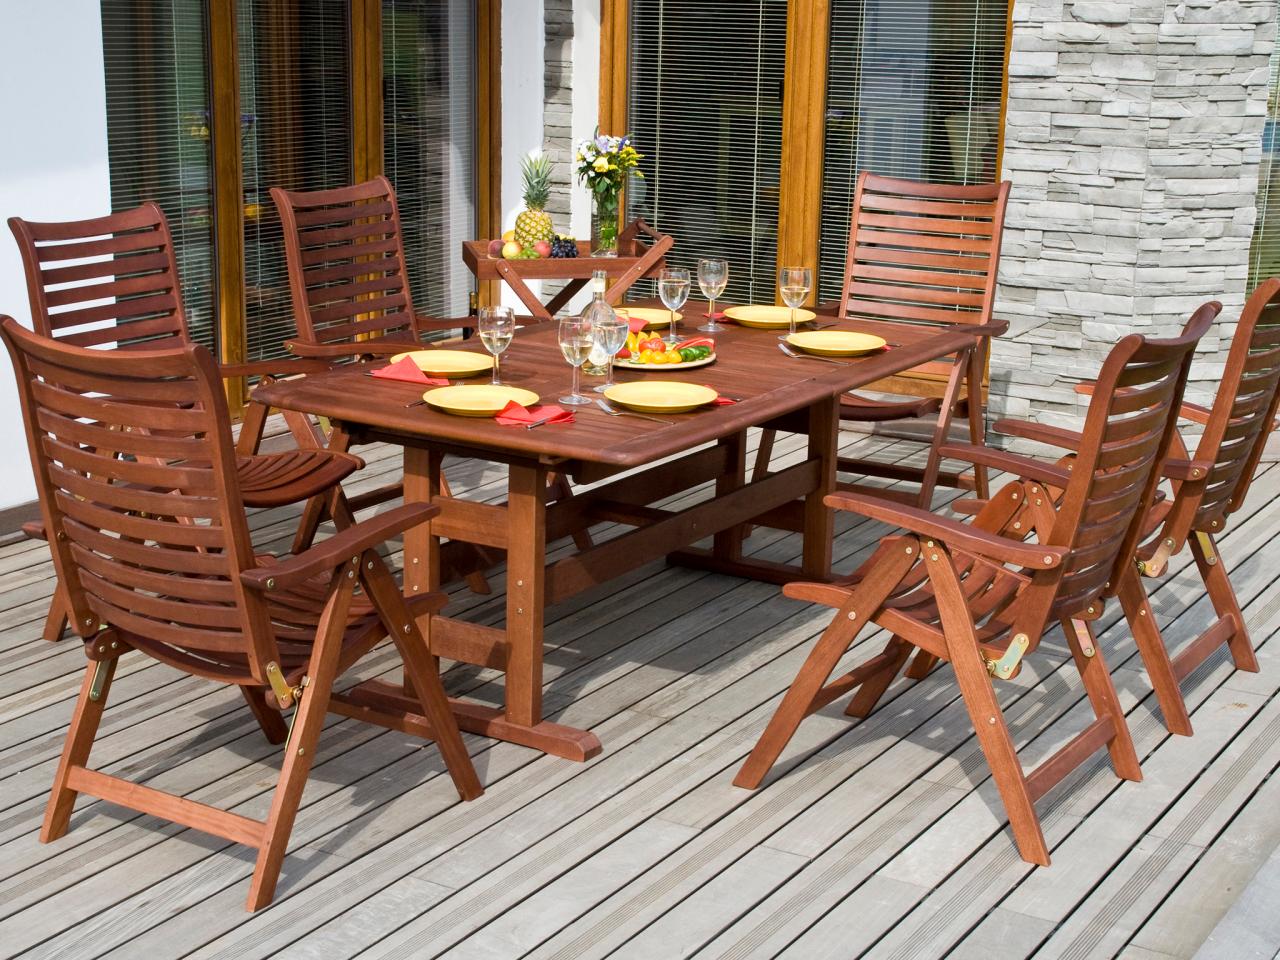 Tips For Refinishing Wooden Outdoor Furniture Diy